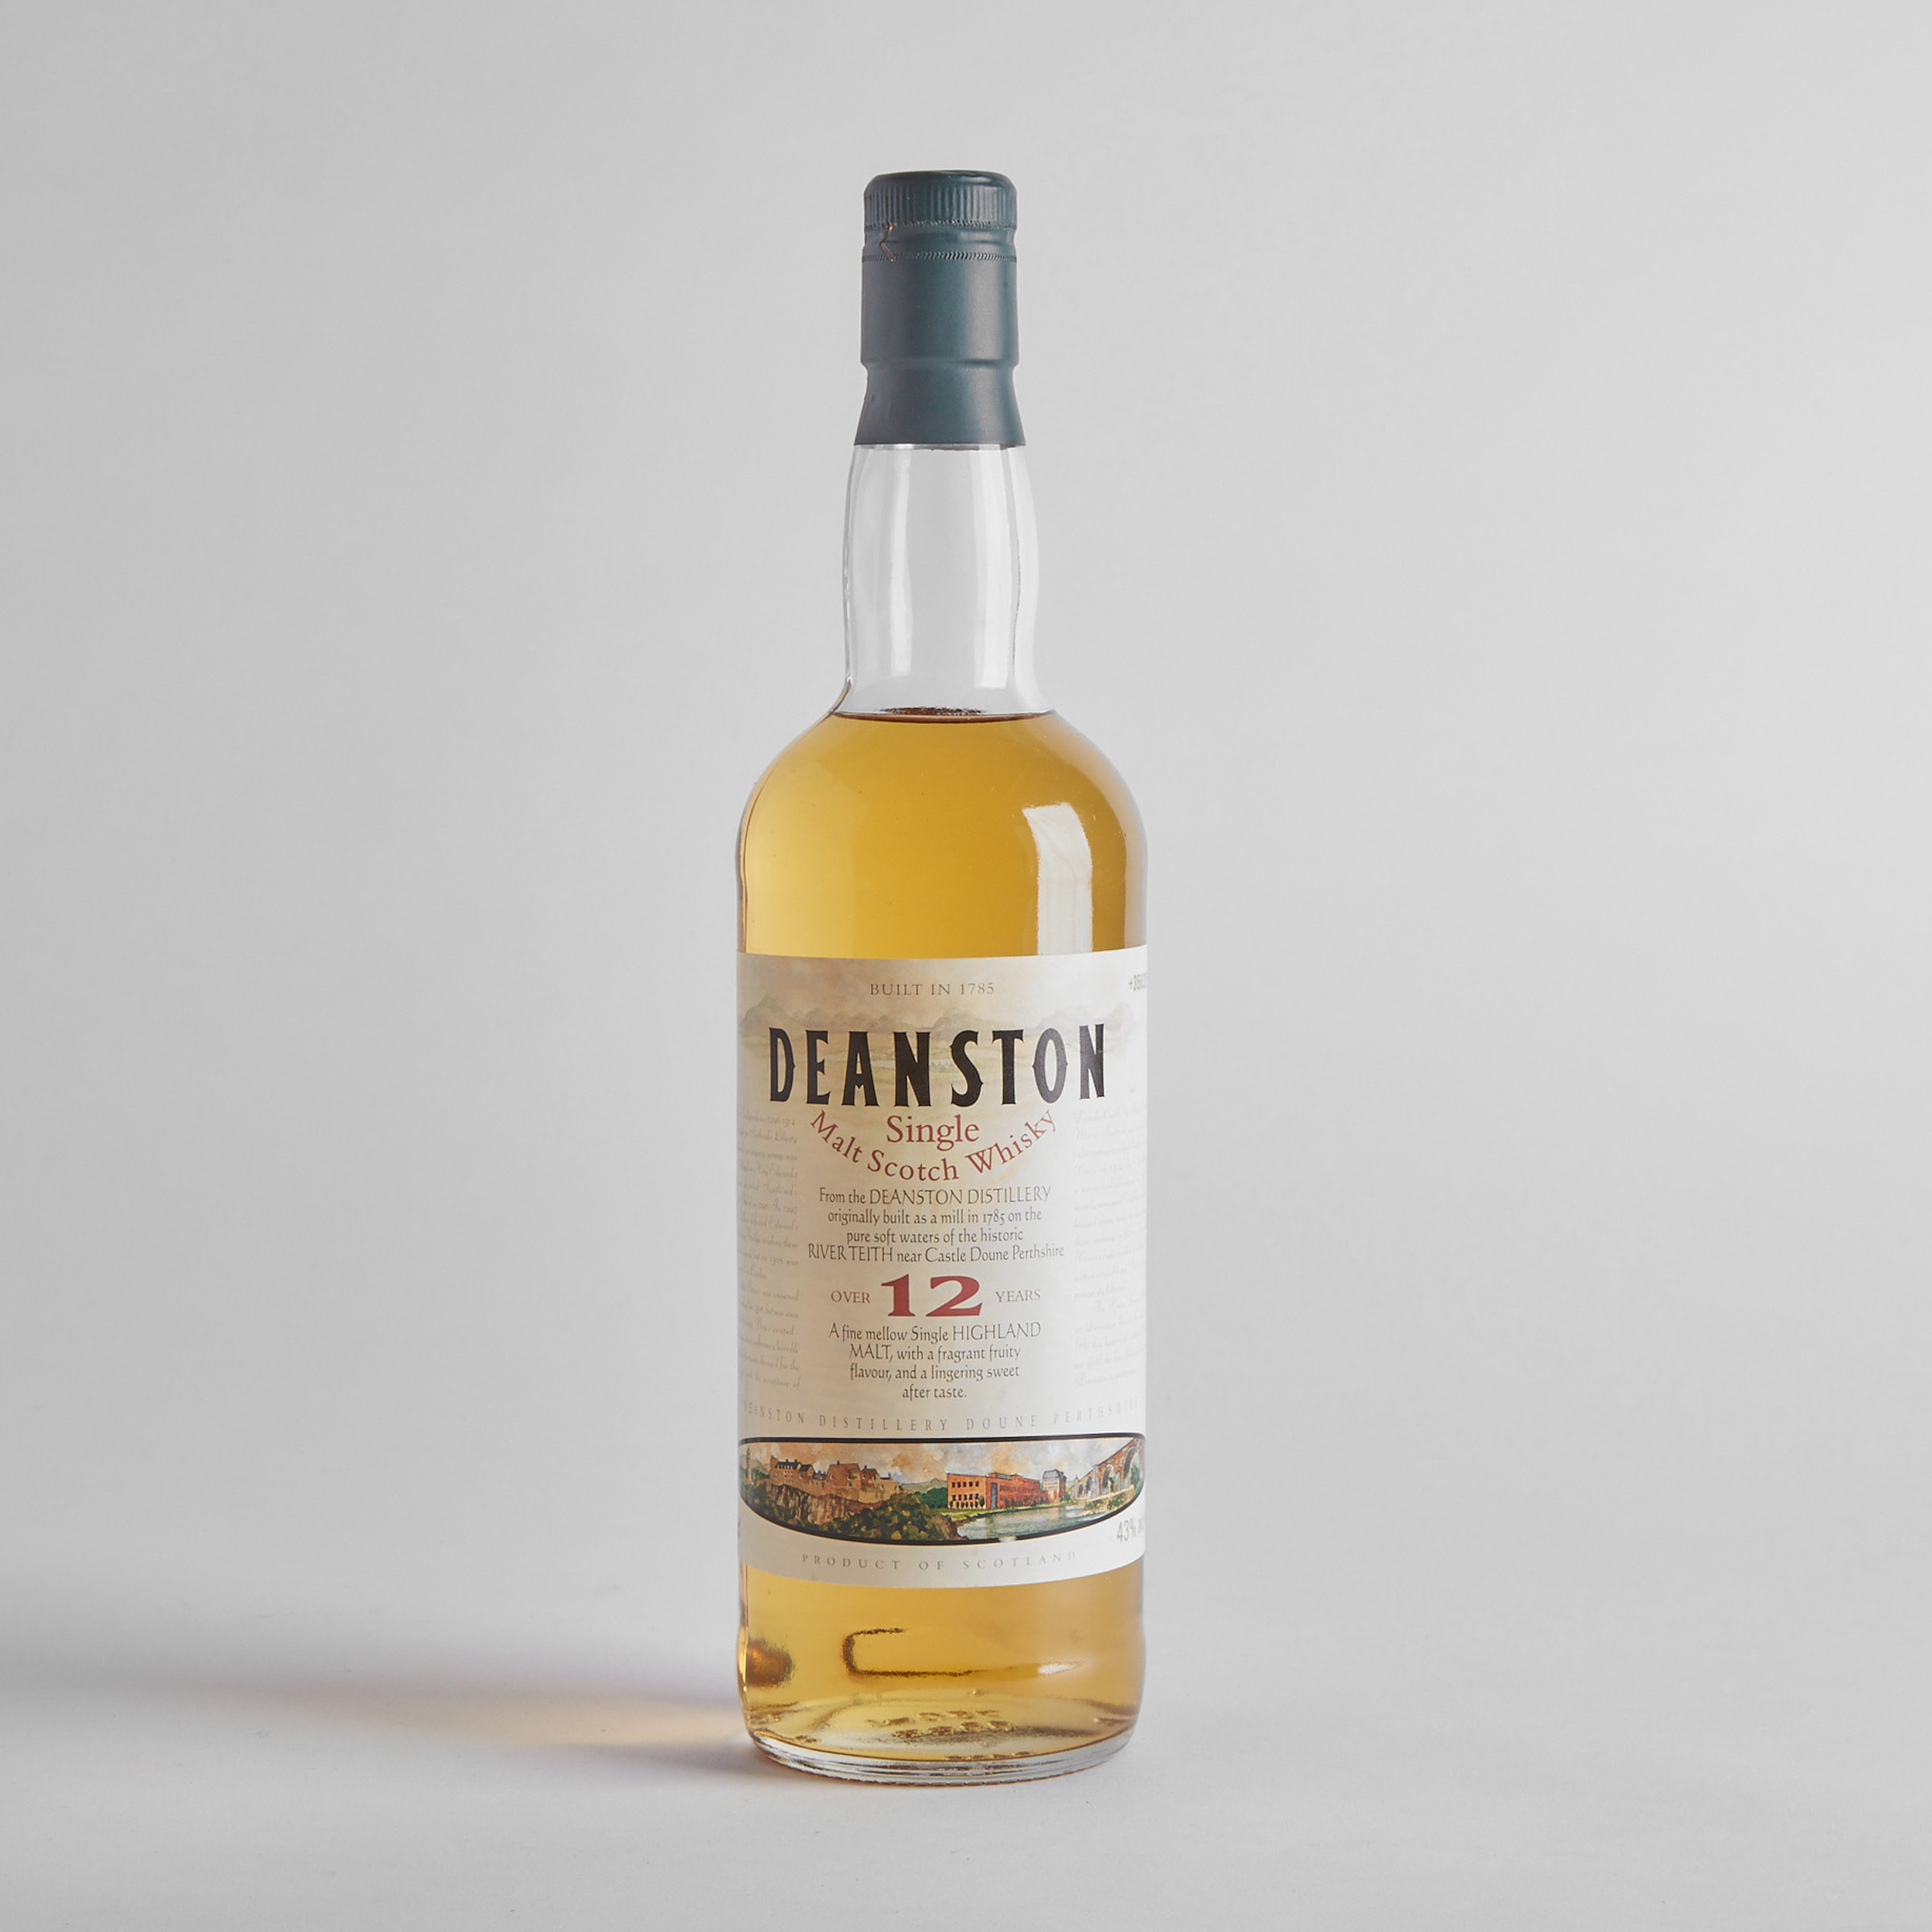 DEANSTON SINGLE MALT SCOTCH WHISKY 12 YEARS (ONE 75 CL)